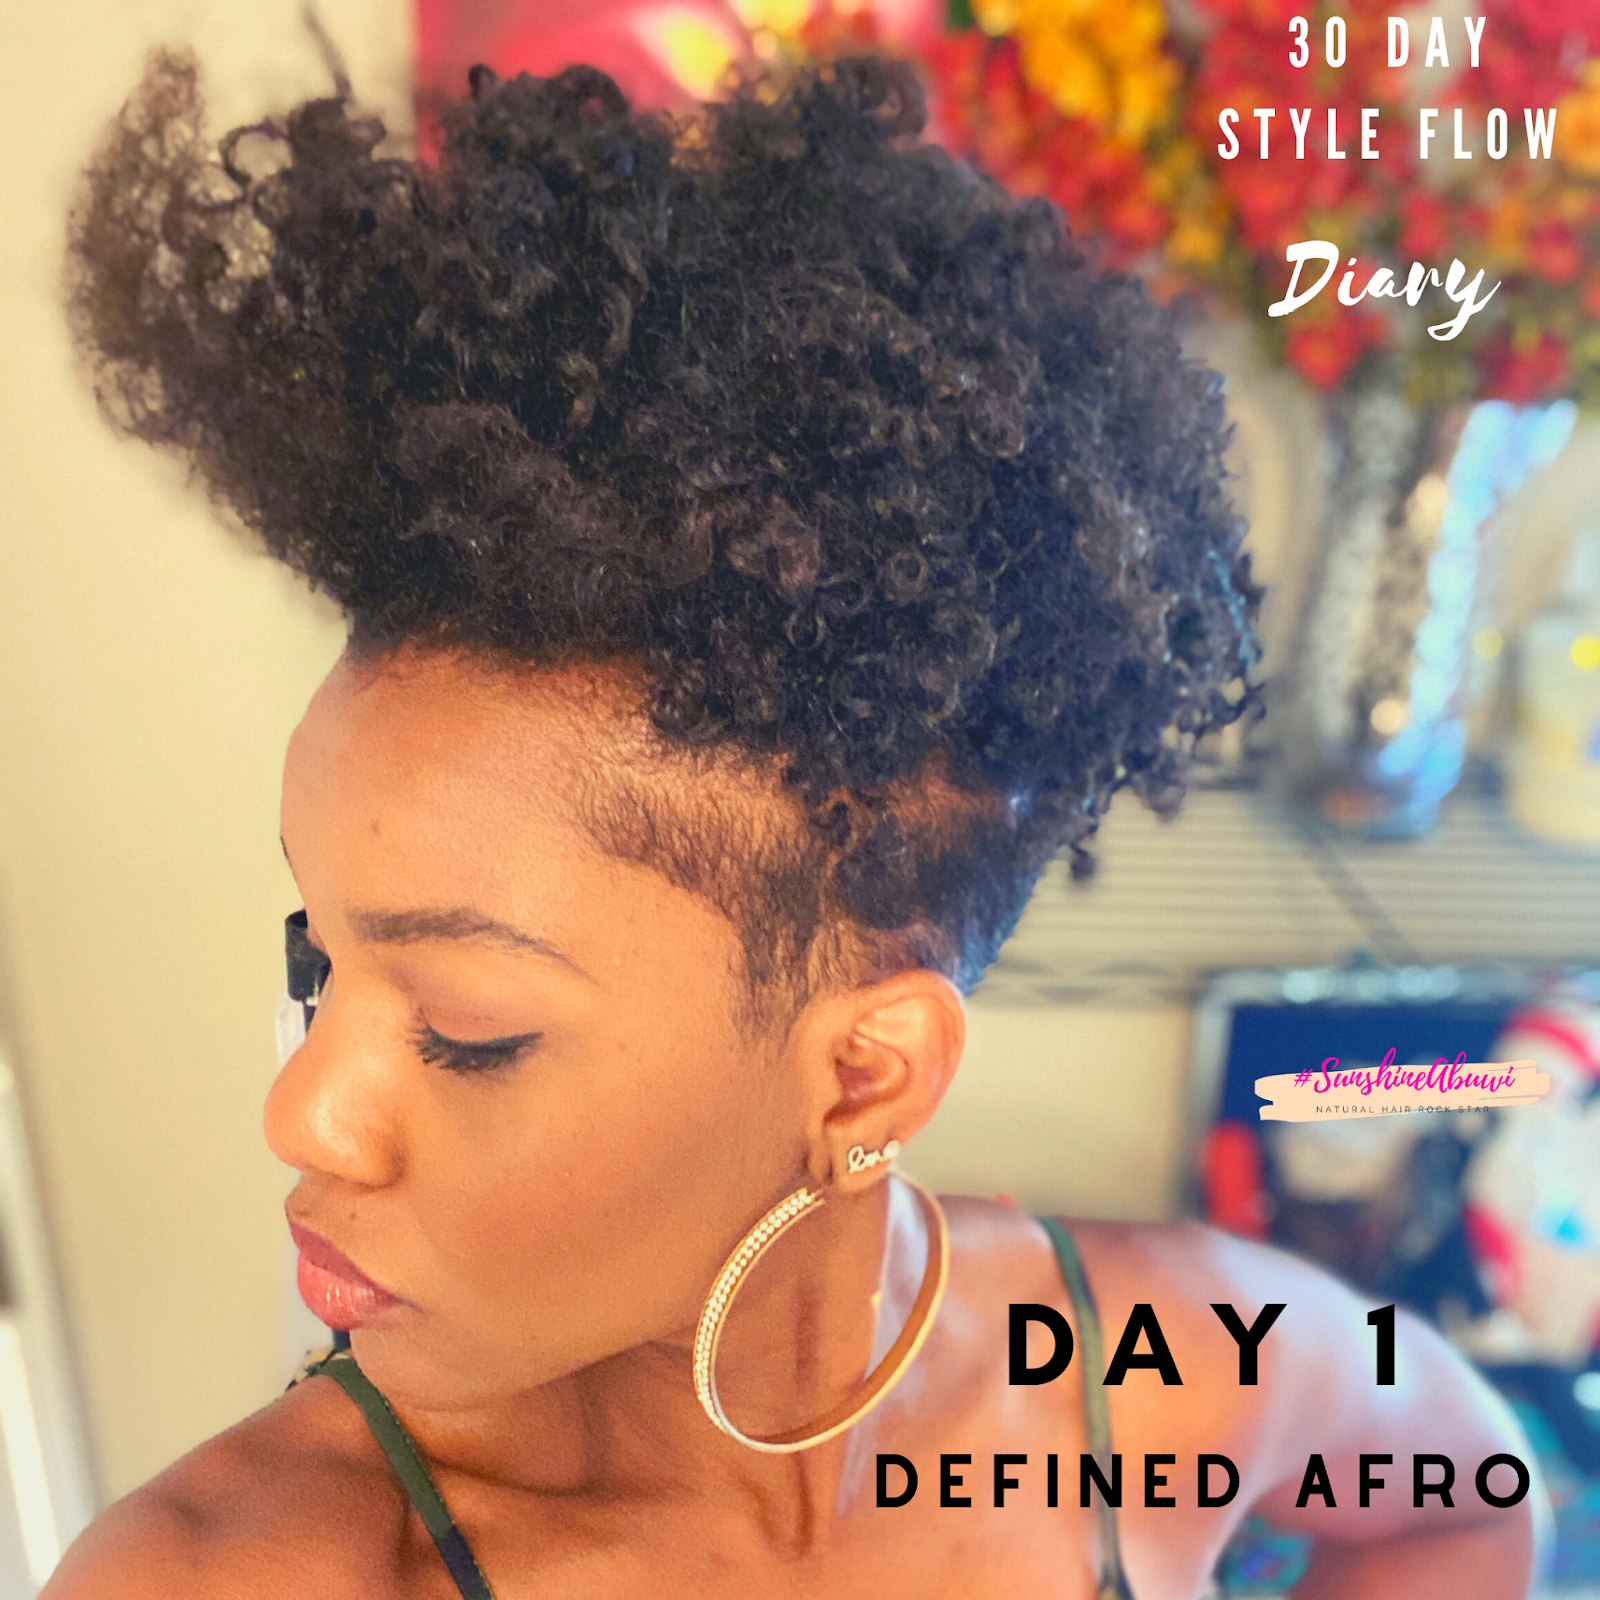 Day 1: 30 Day Style Flow Diary